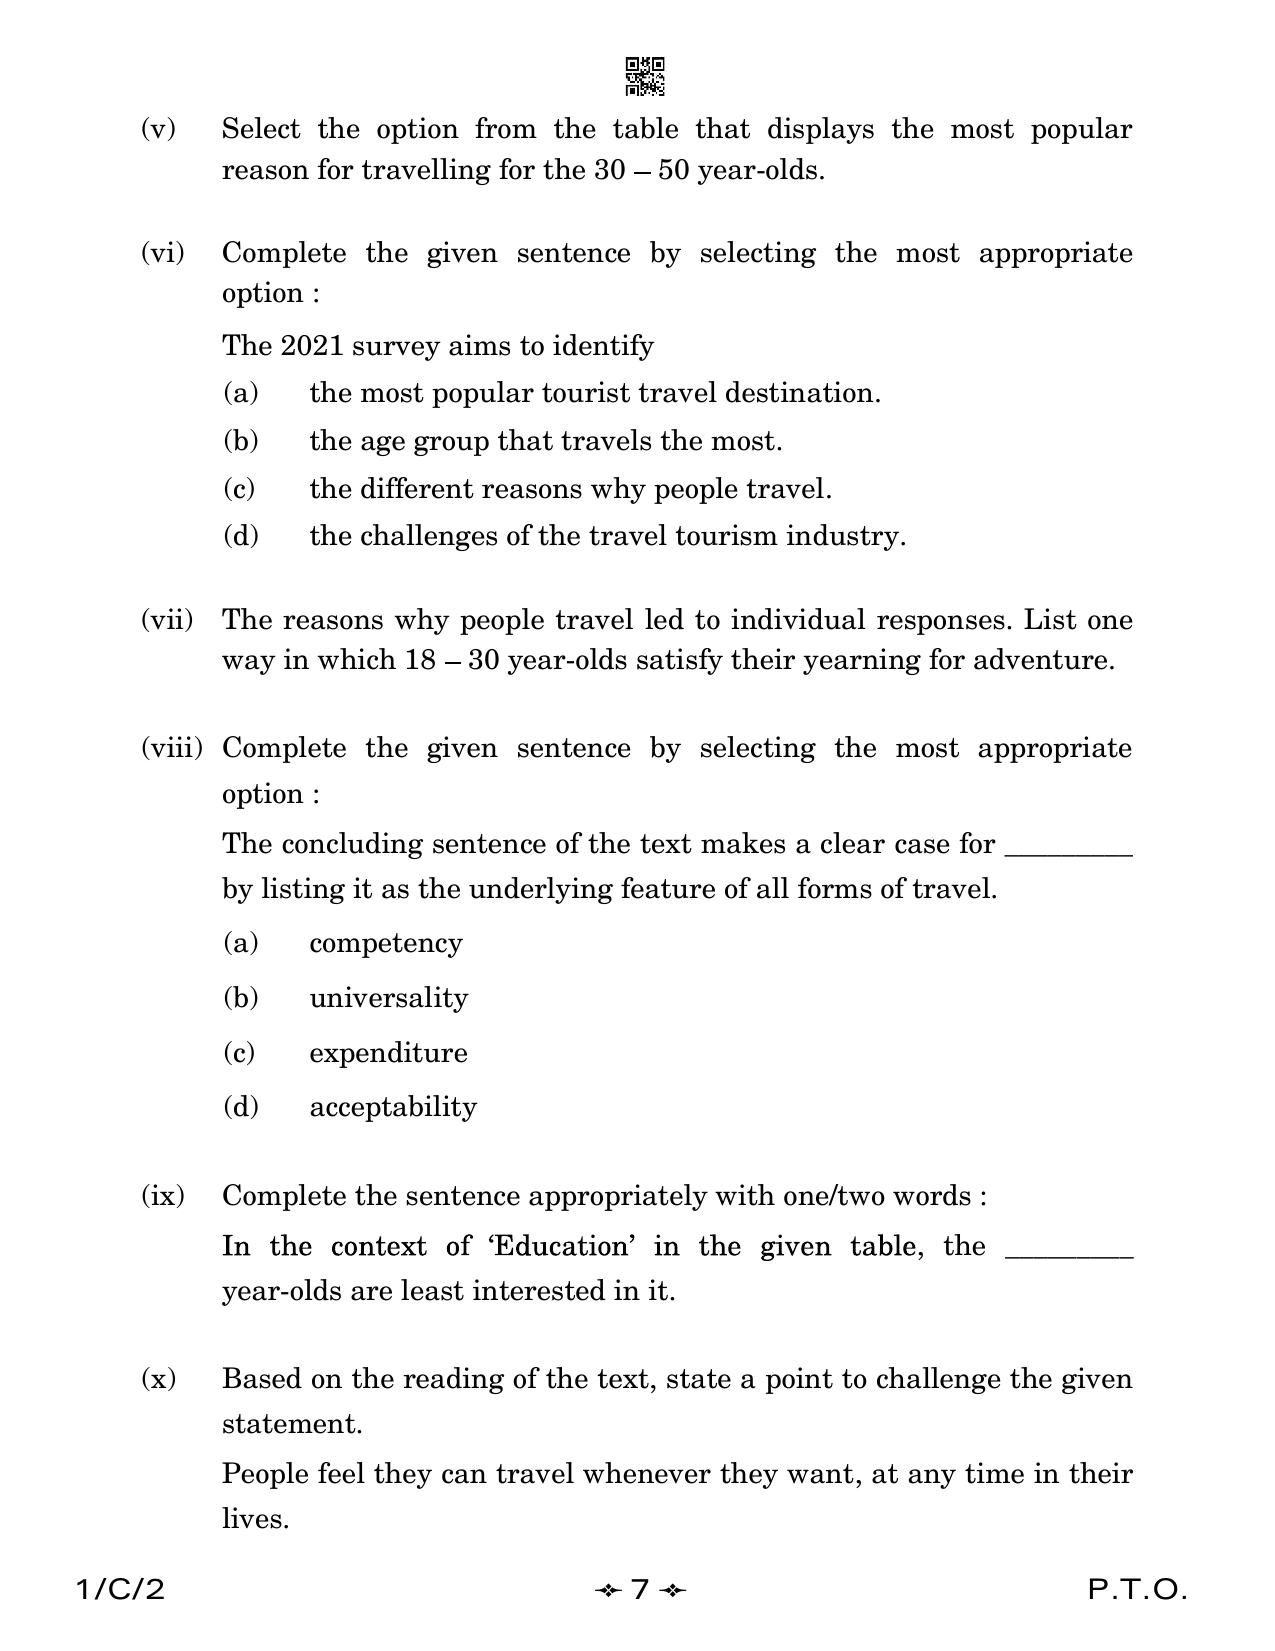 CBSE Class 12 1-2 English Core 2023 (Compartment) Question Paper - Page 7